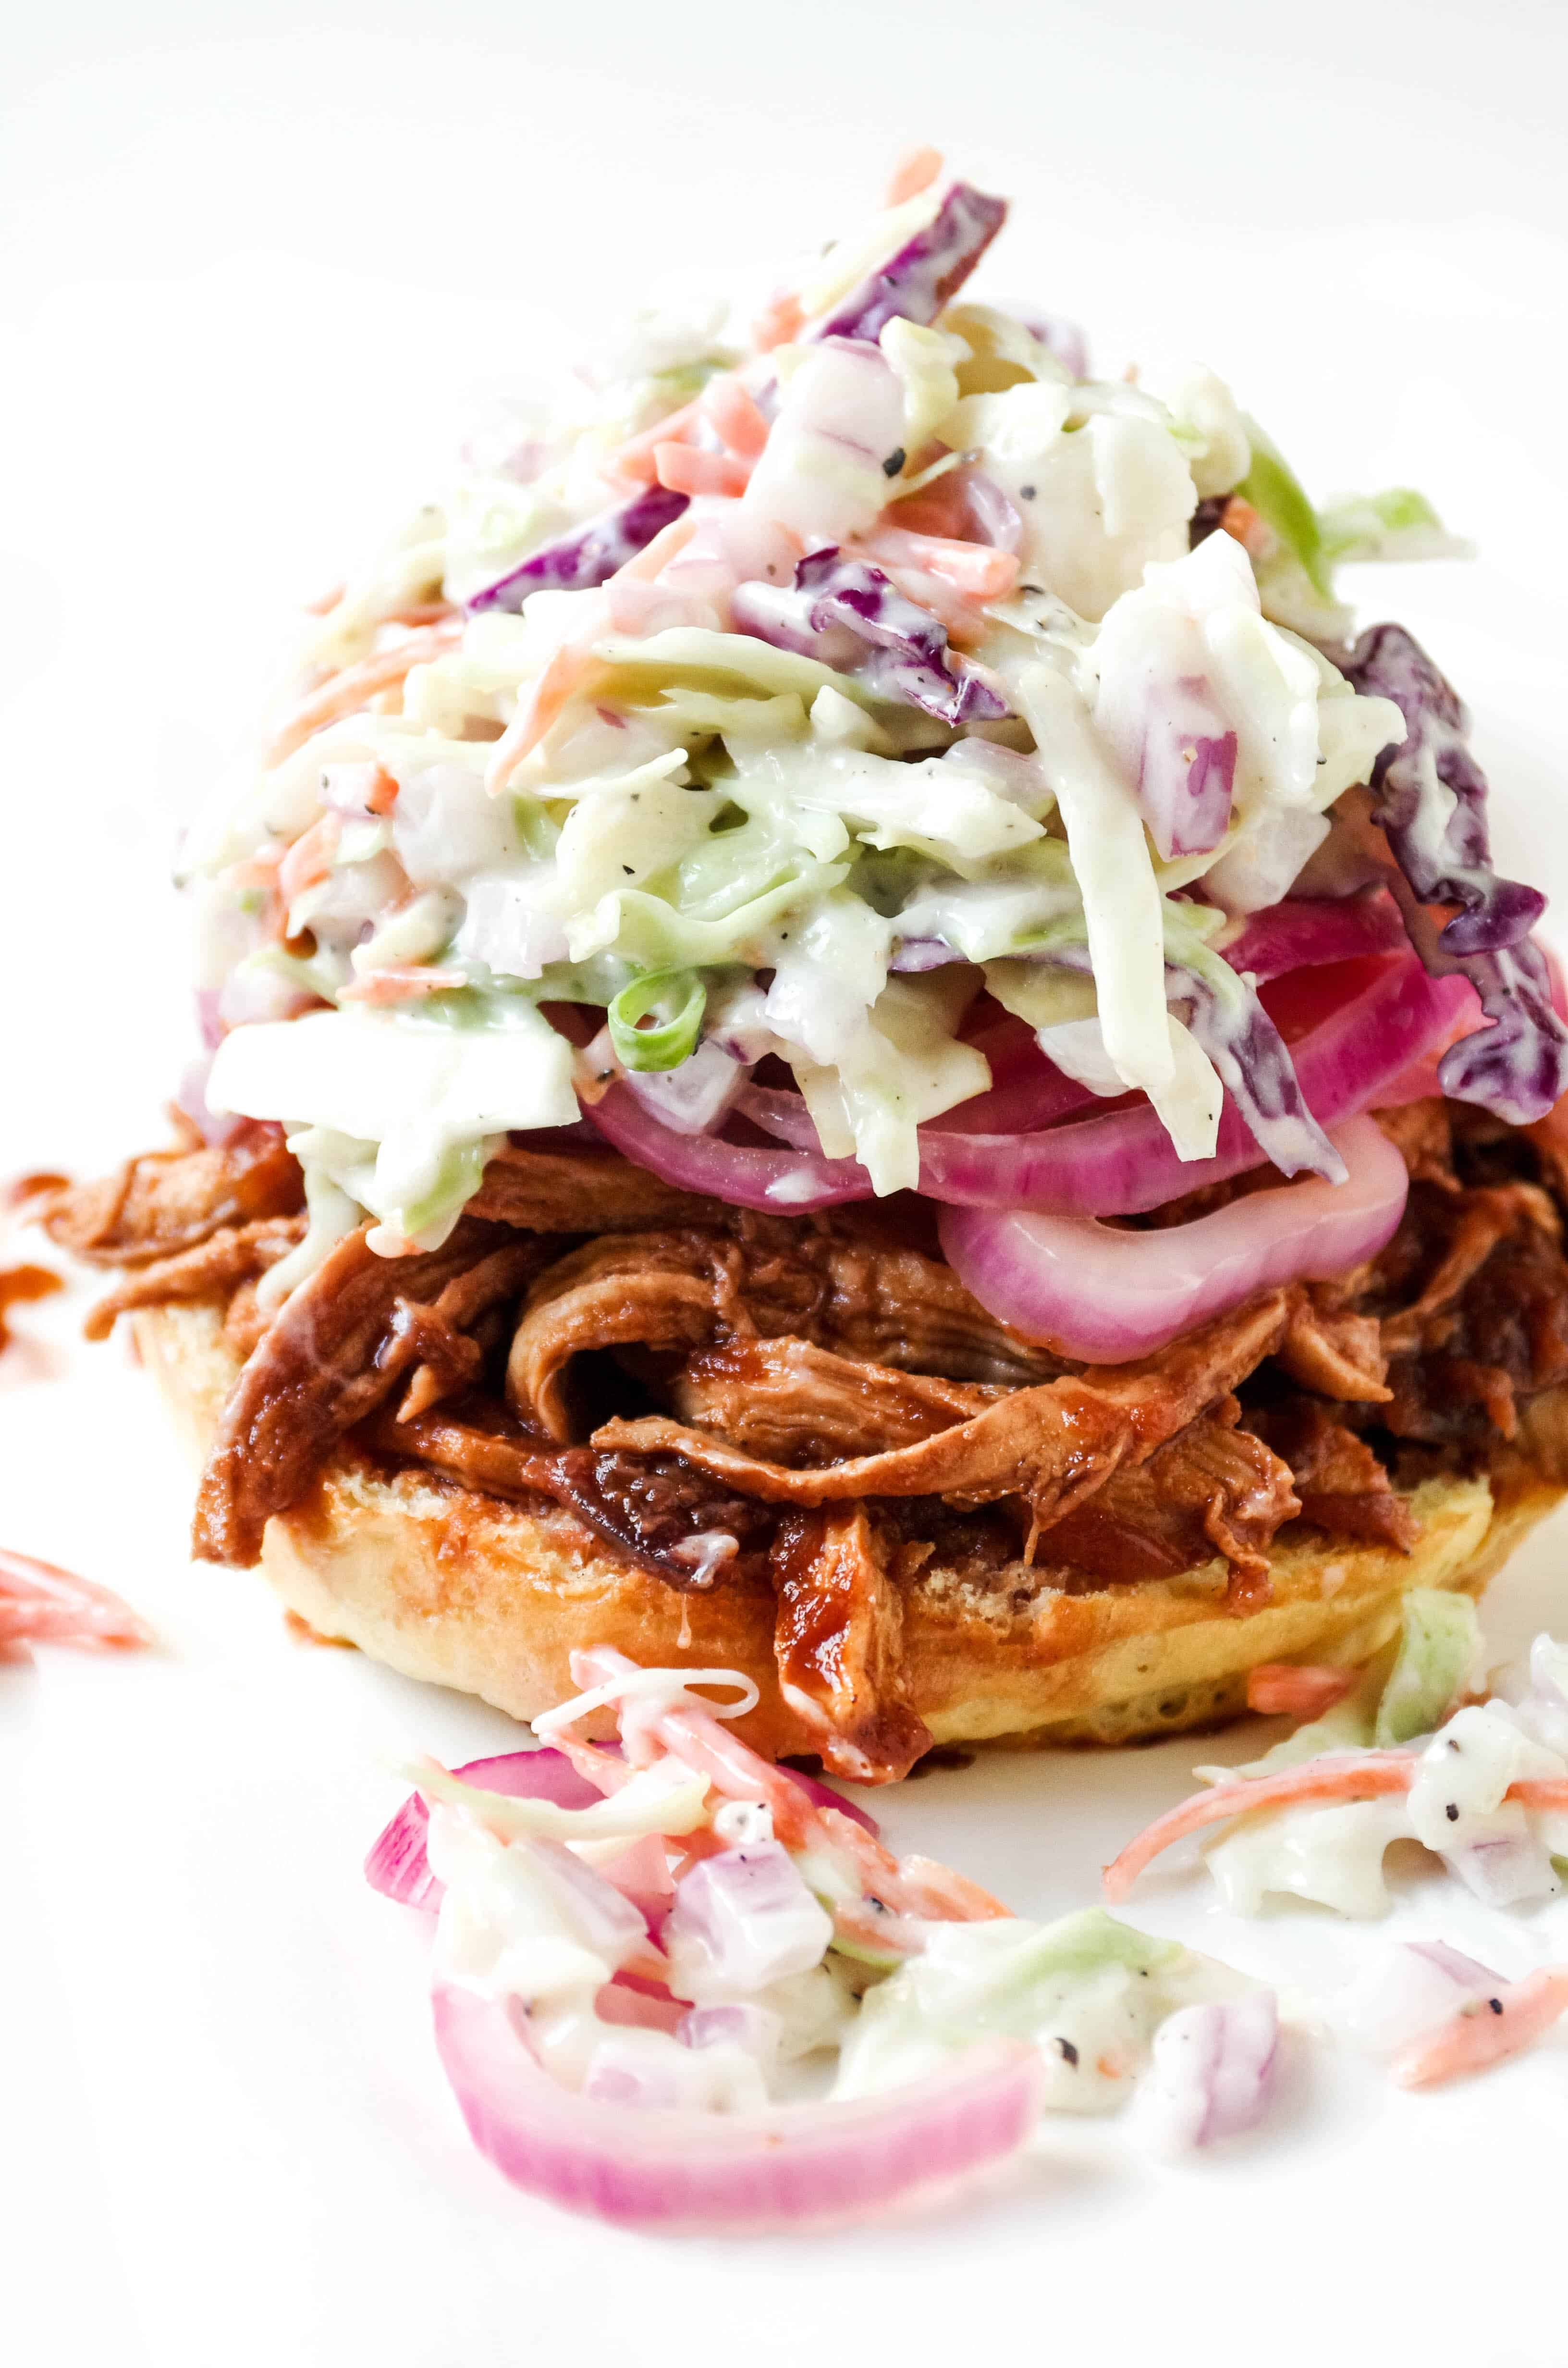 Sliced brioche bun topped with shredded cherry bbq chicken, pickled red onions, and creamy coleslaw.